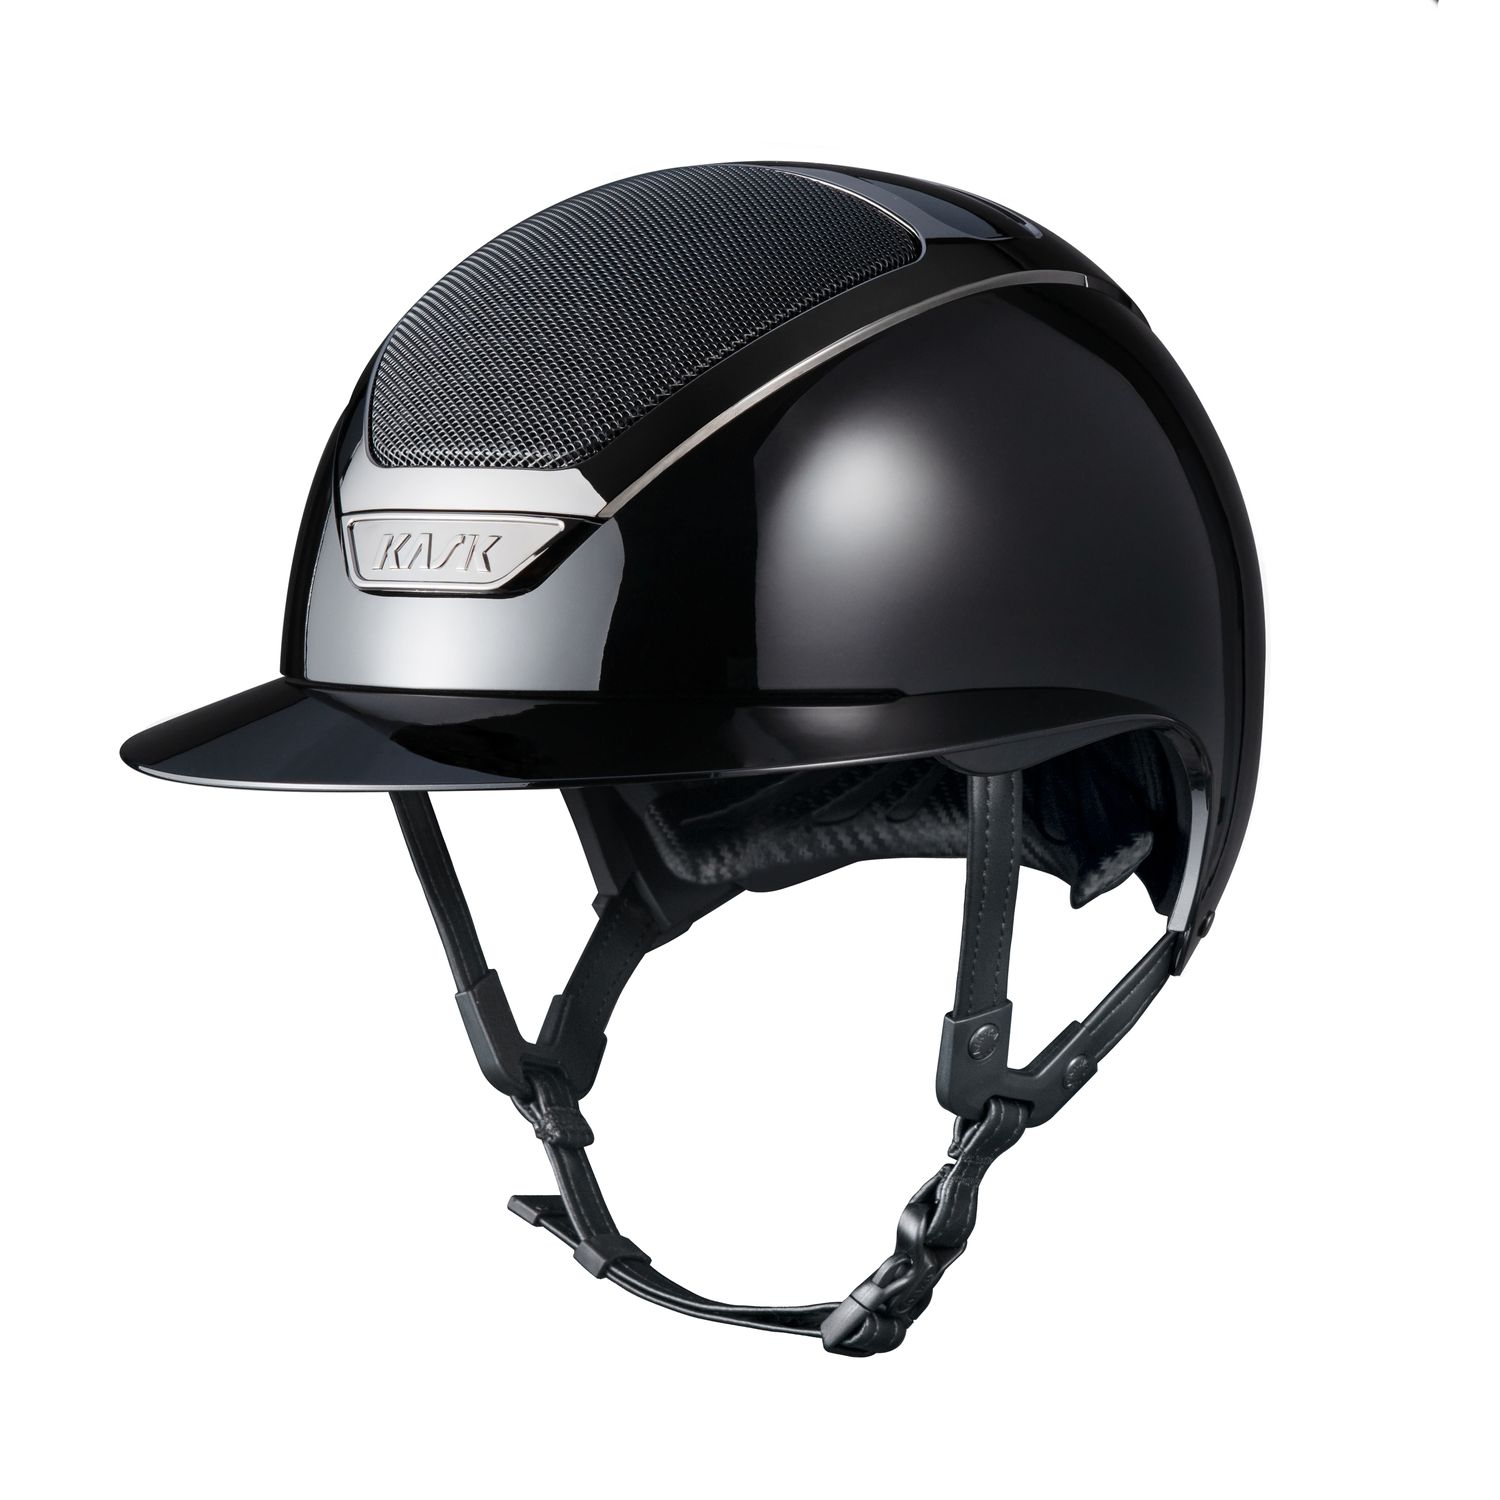 KASK Star Lady Pure Shine Reithelm inkl. Liner von KASK